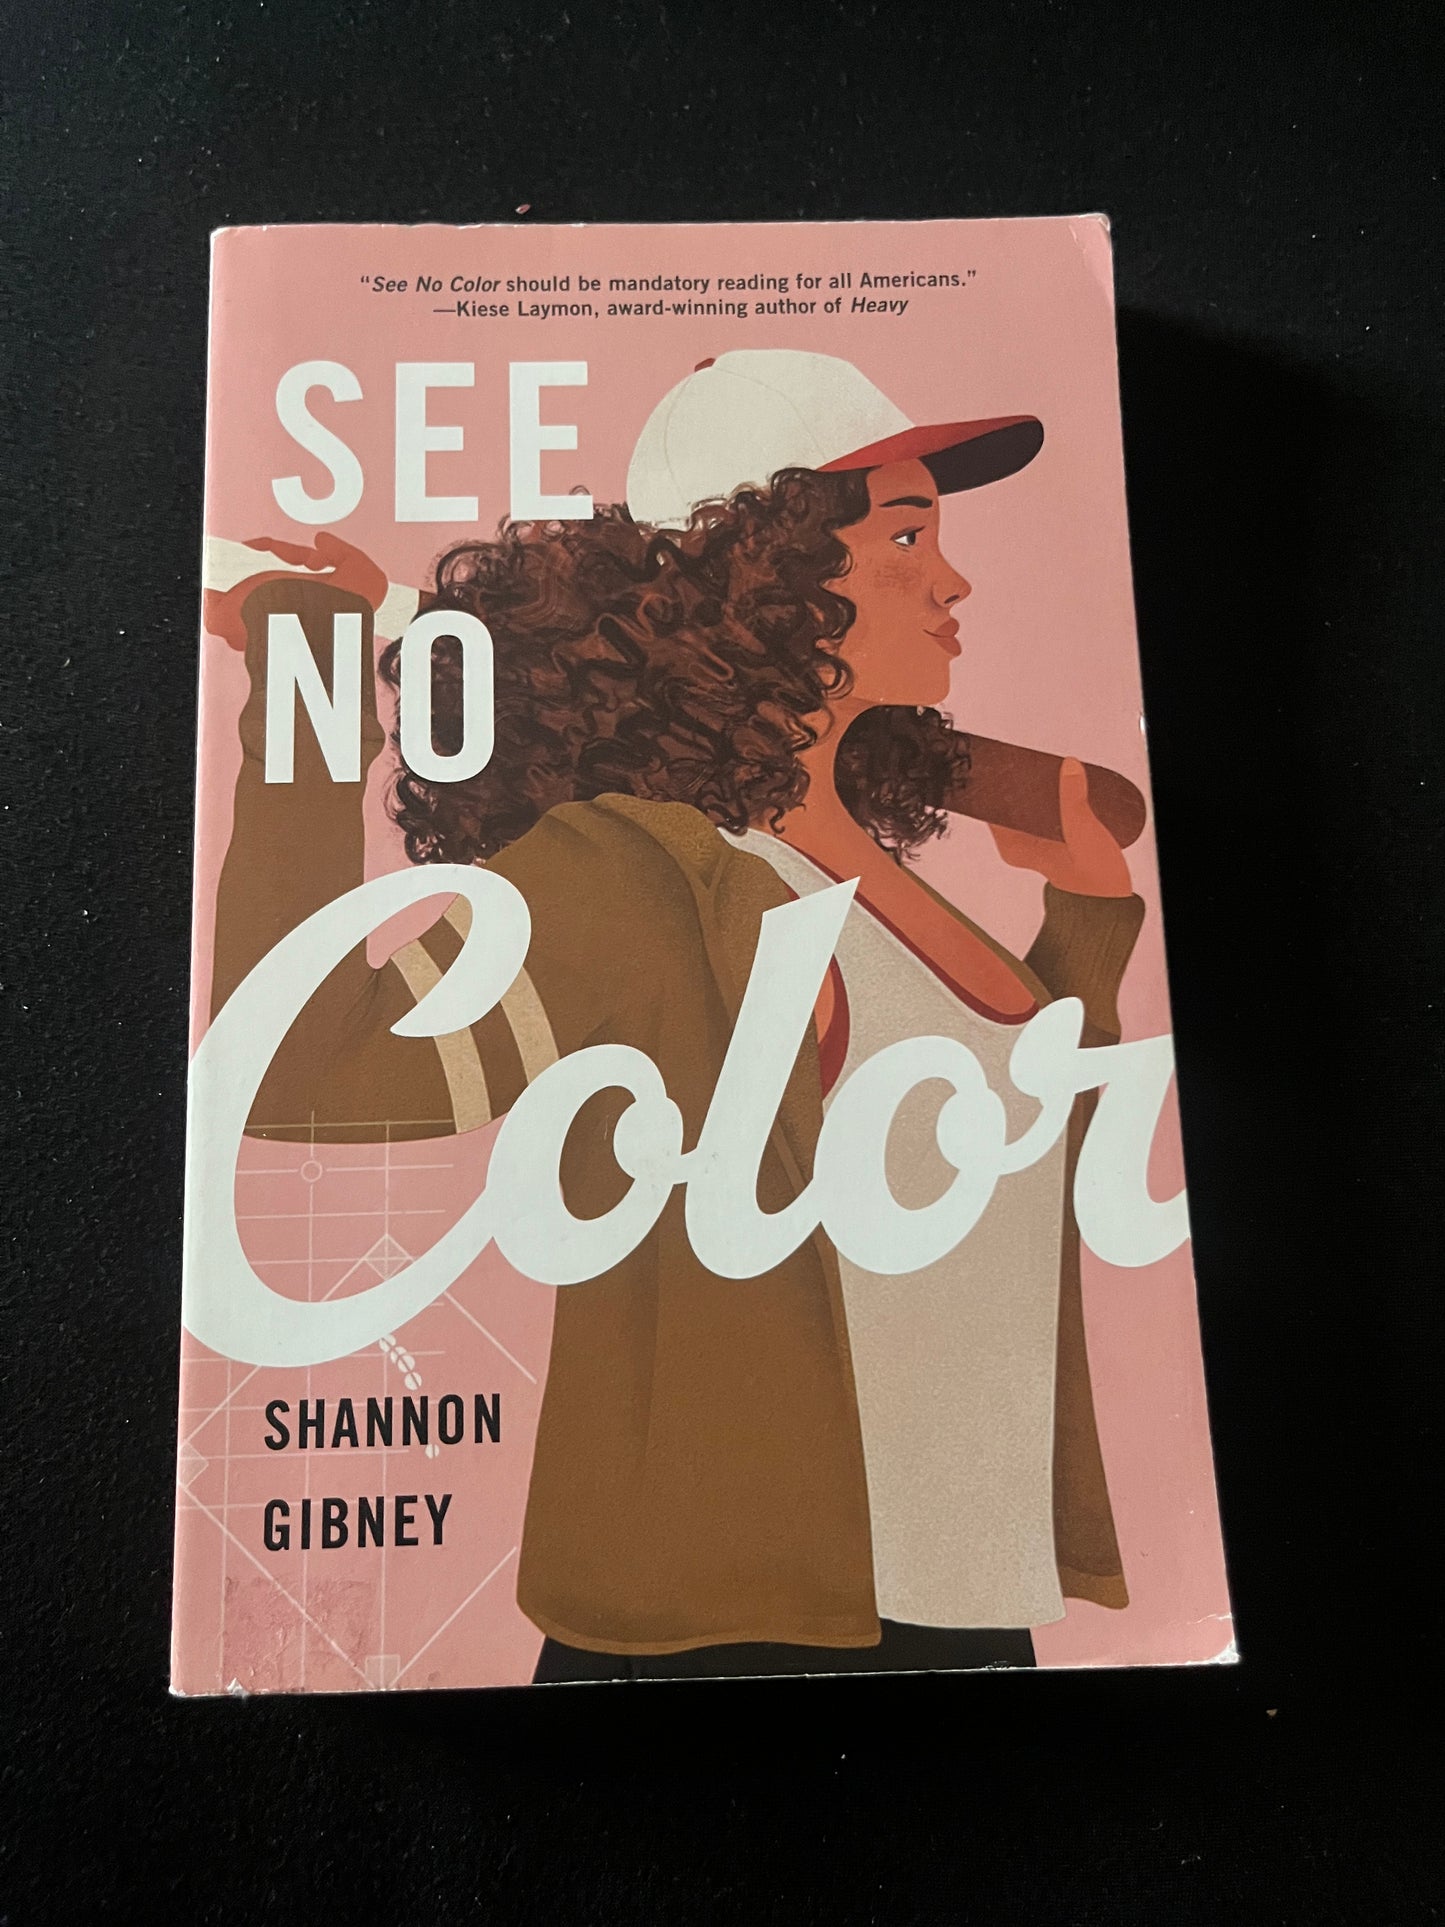 SEE NO COLOR by Shannon Gibney